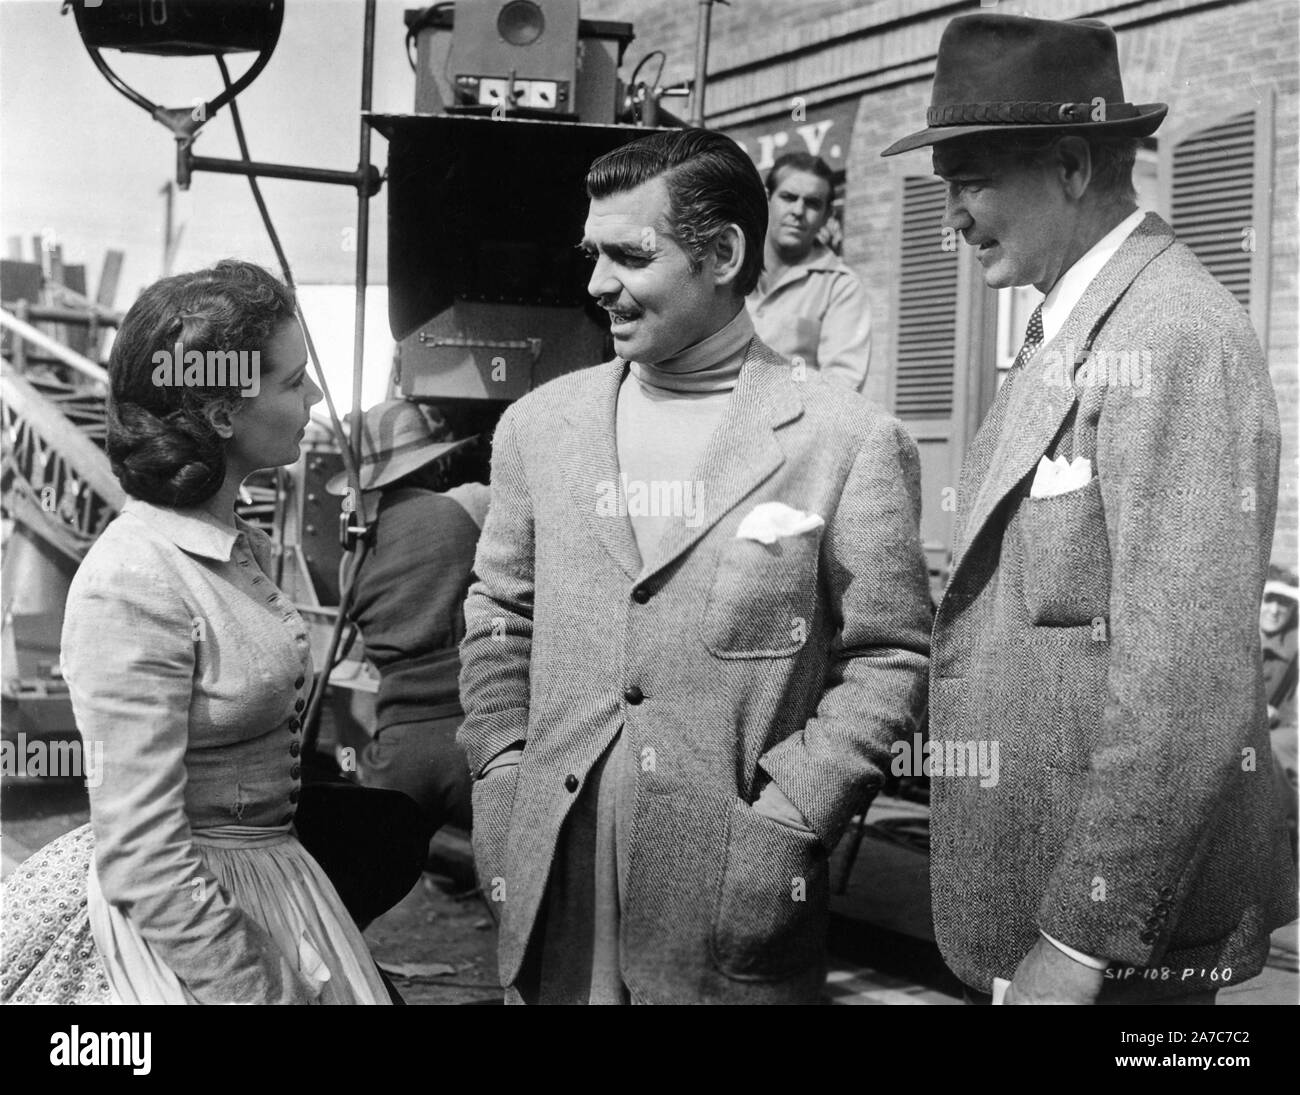 VIVIEN LEIGH CLARK GABLE and Director VICTOR FLEMING on set candid during filming of GONE WITH THE WIND 1939 director Victor Fleming novel Margaret Mitchell producer David O. Selznick Selznick International Pictures / Metro Goldwyn Mayer Stock Photo